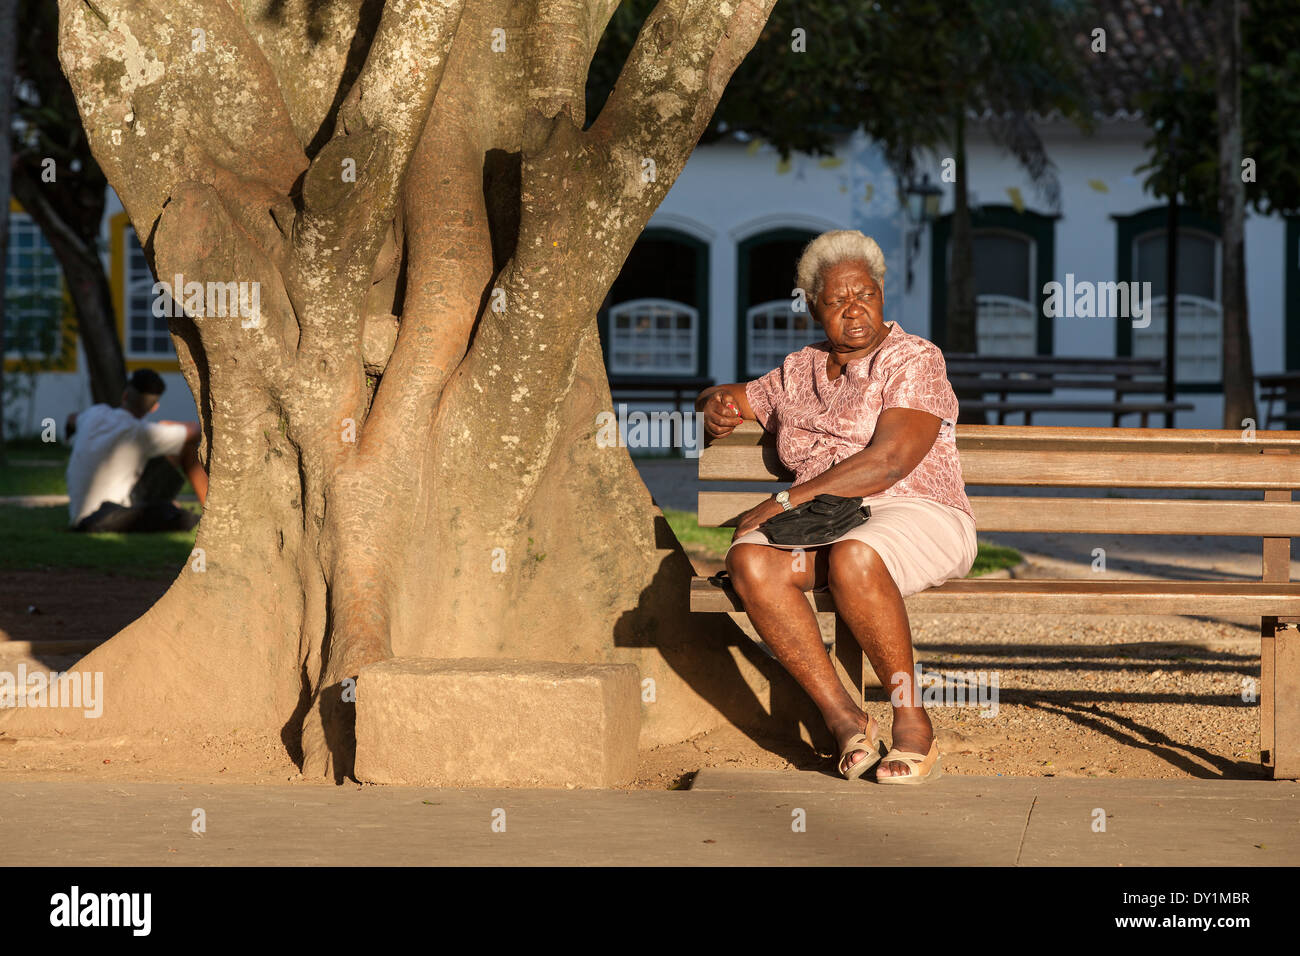 Paraty, colonial town, typical colonial houses, big tree, woman on the bench, Rio de Janeiro, Costa Verde, Brazil Stock Photo